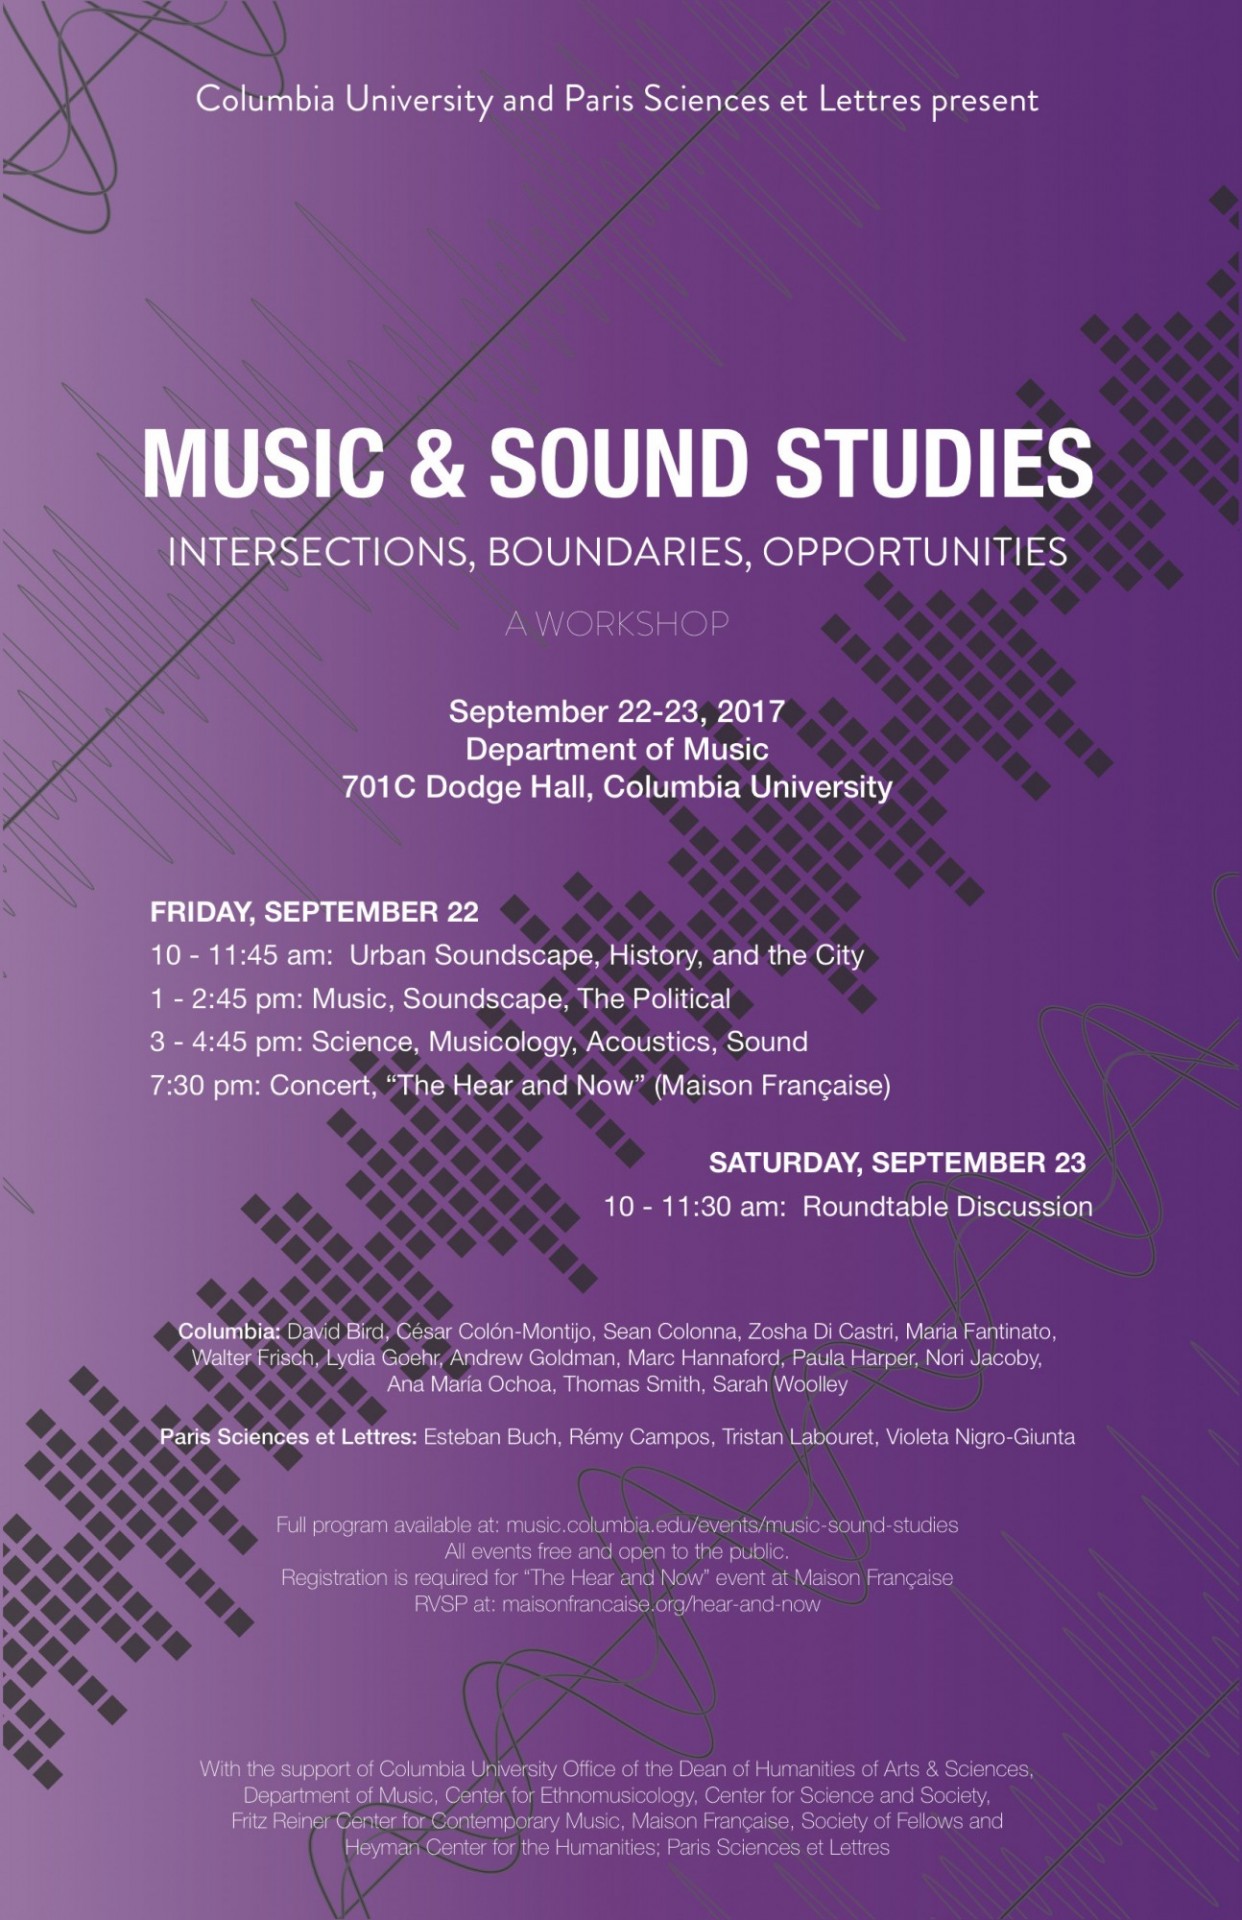 Picture of a flyer for Music & Sound Studies